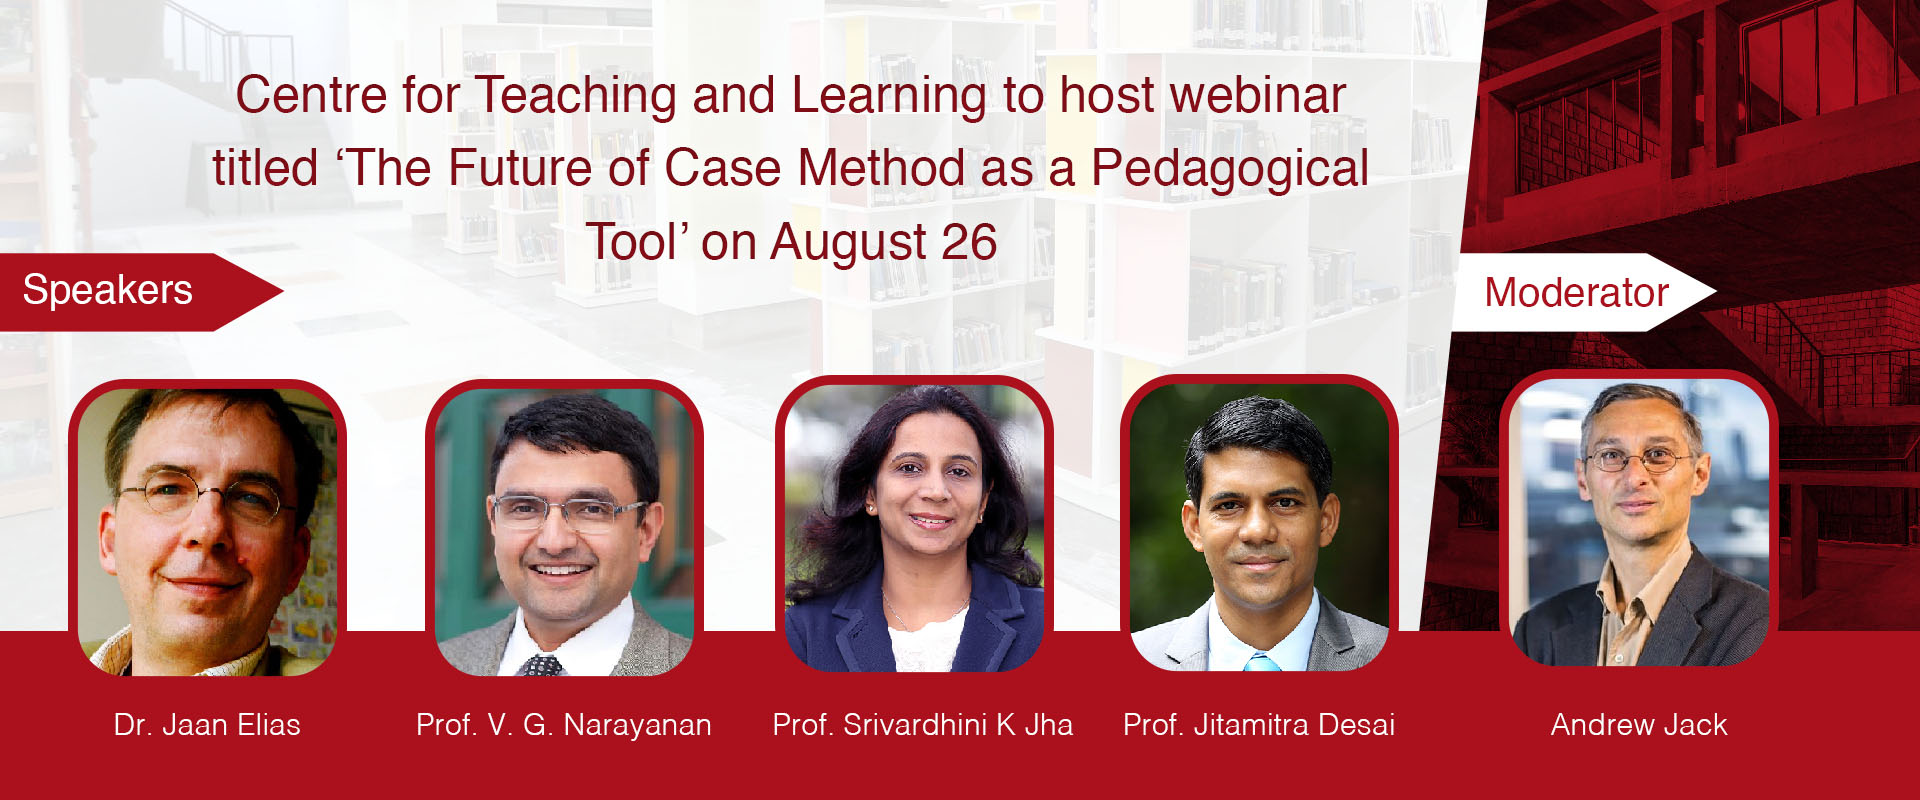 Centre for Teaching and Learning to host webinar titled ‘The Future of Case Method as a Pedagogical Tool’ on August 26